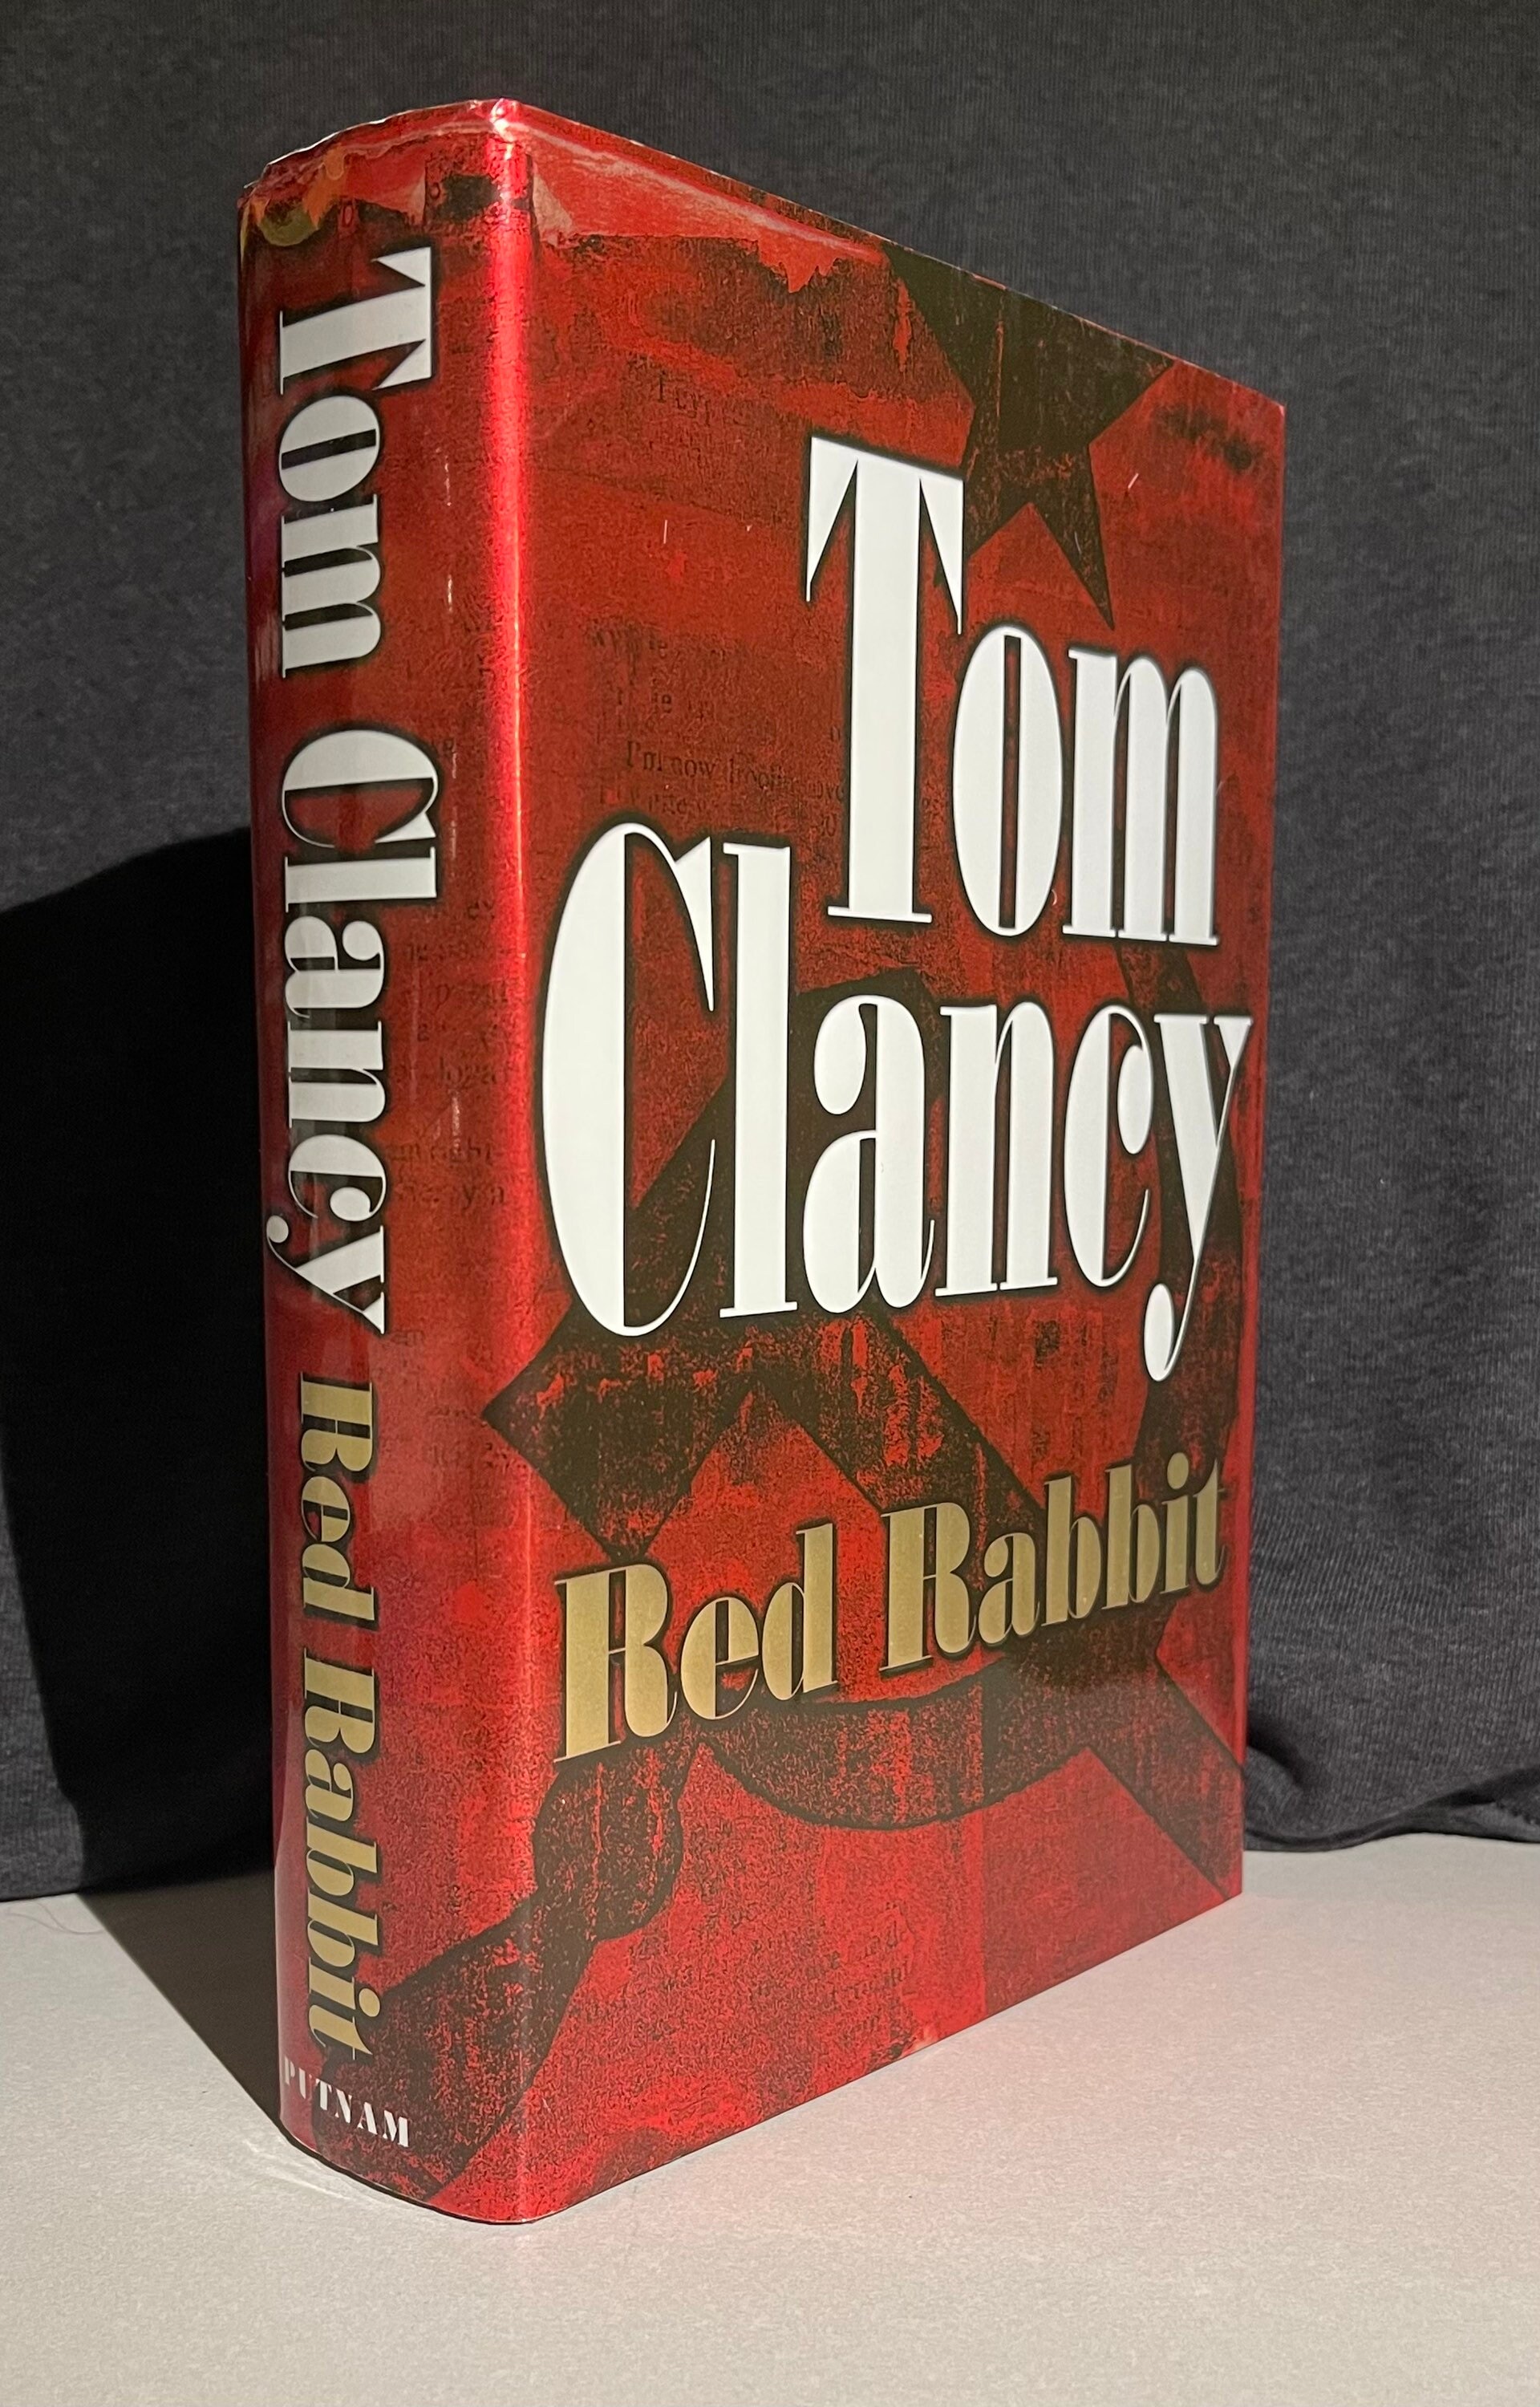 kjole hørbar det sidste Red Rabbit by Tom Clancy. First Edition First Printing. - Etsy